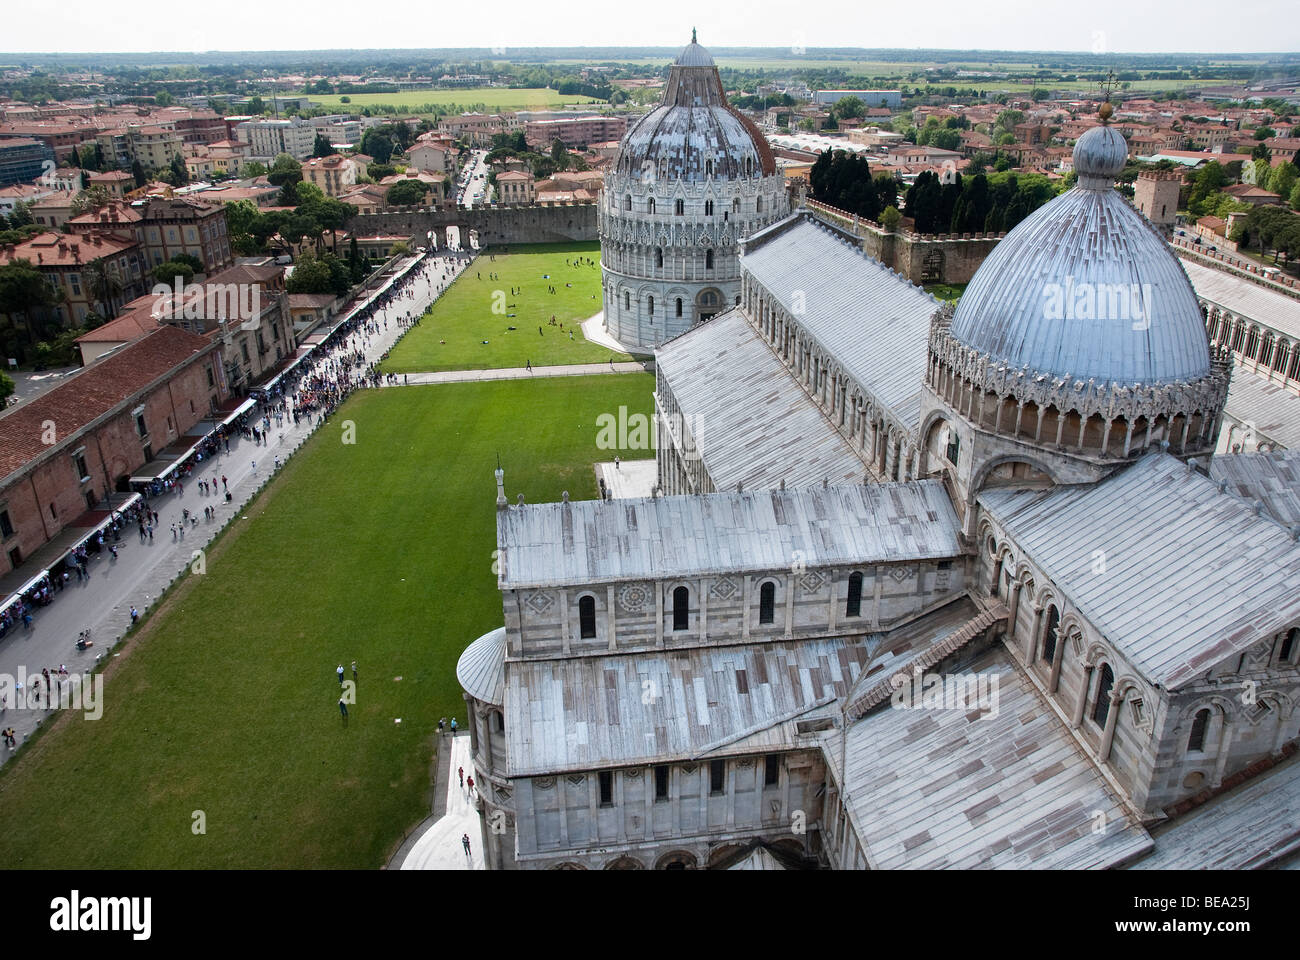 View of the Pisa Duomo, Baptistery and Piazza del Duomo from the Leaning Tower Stock Photo